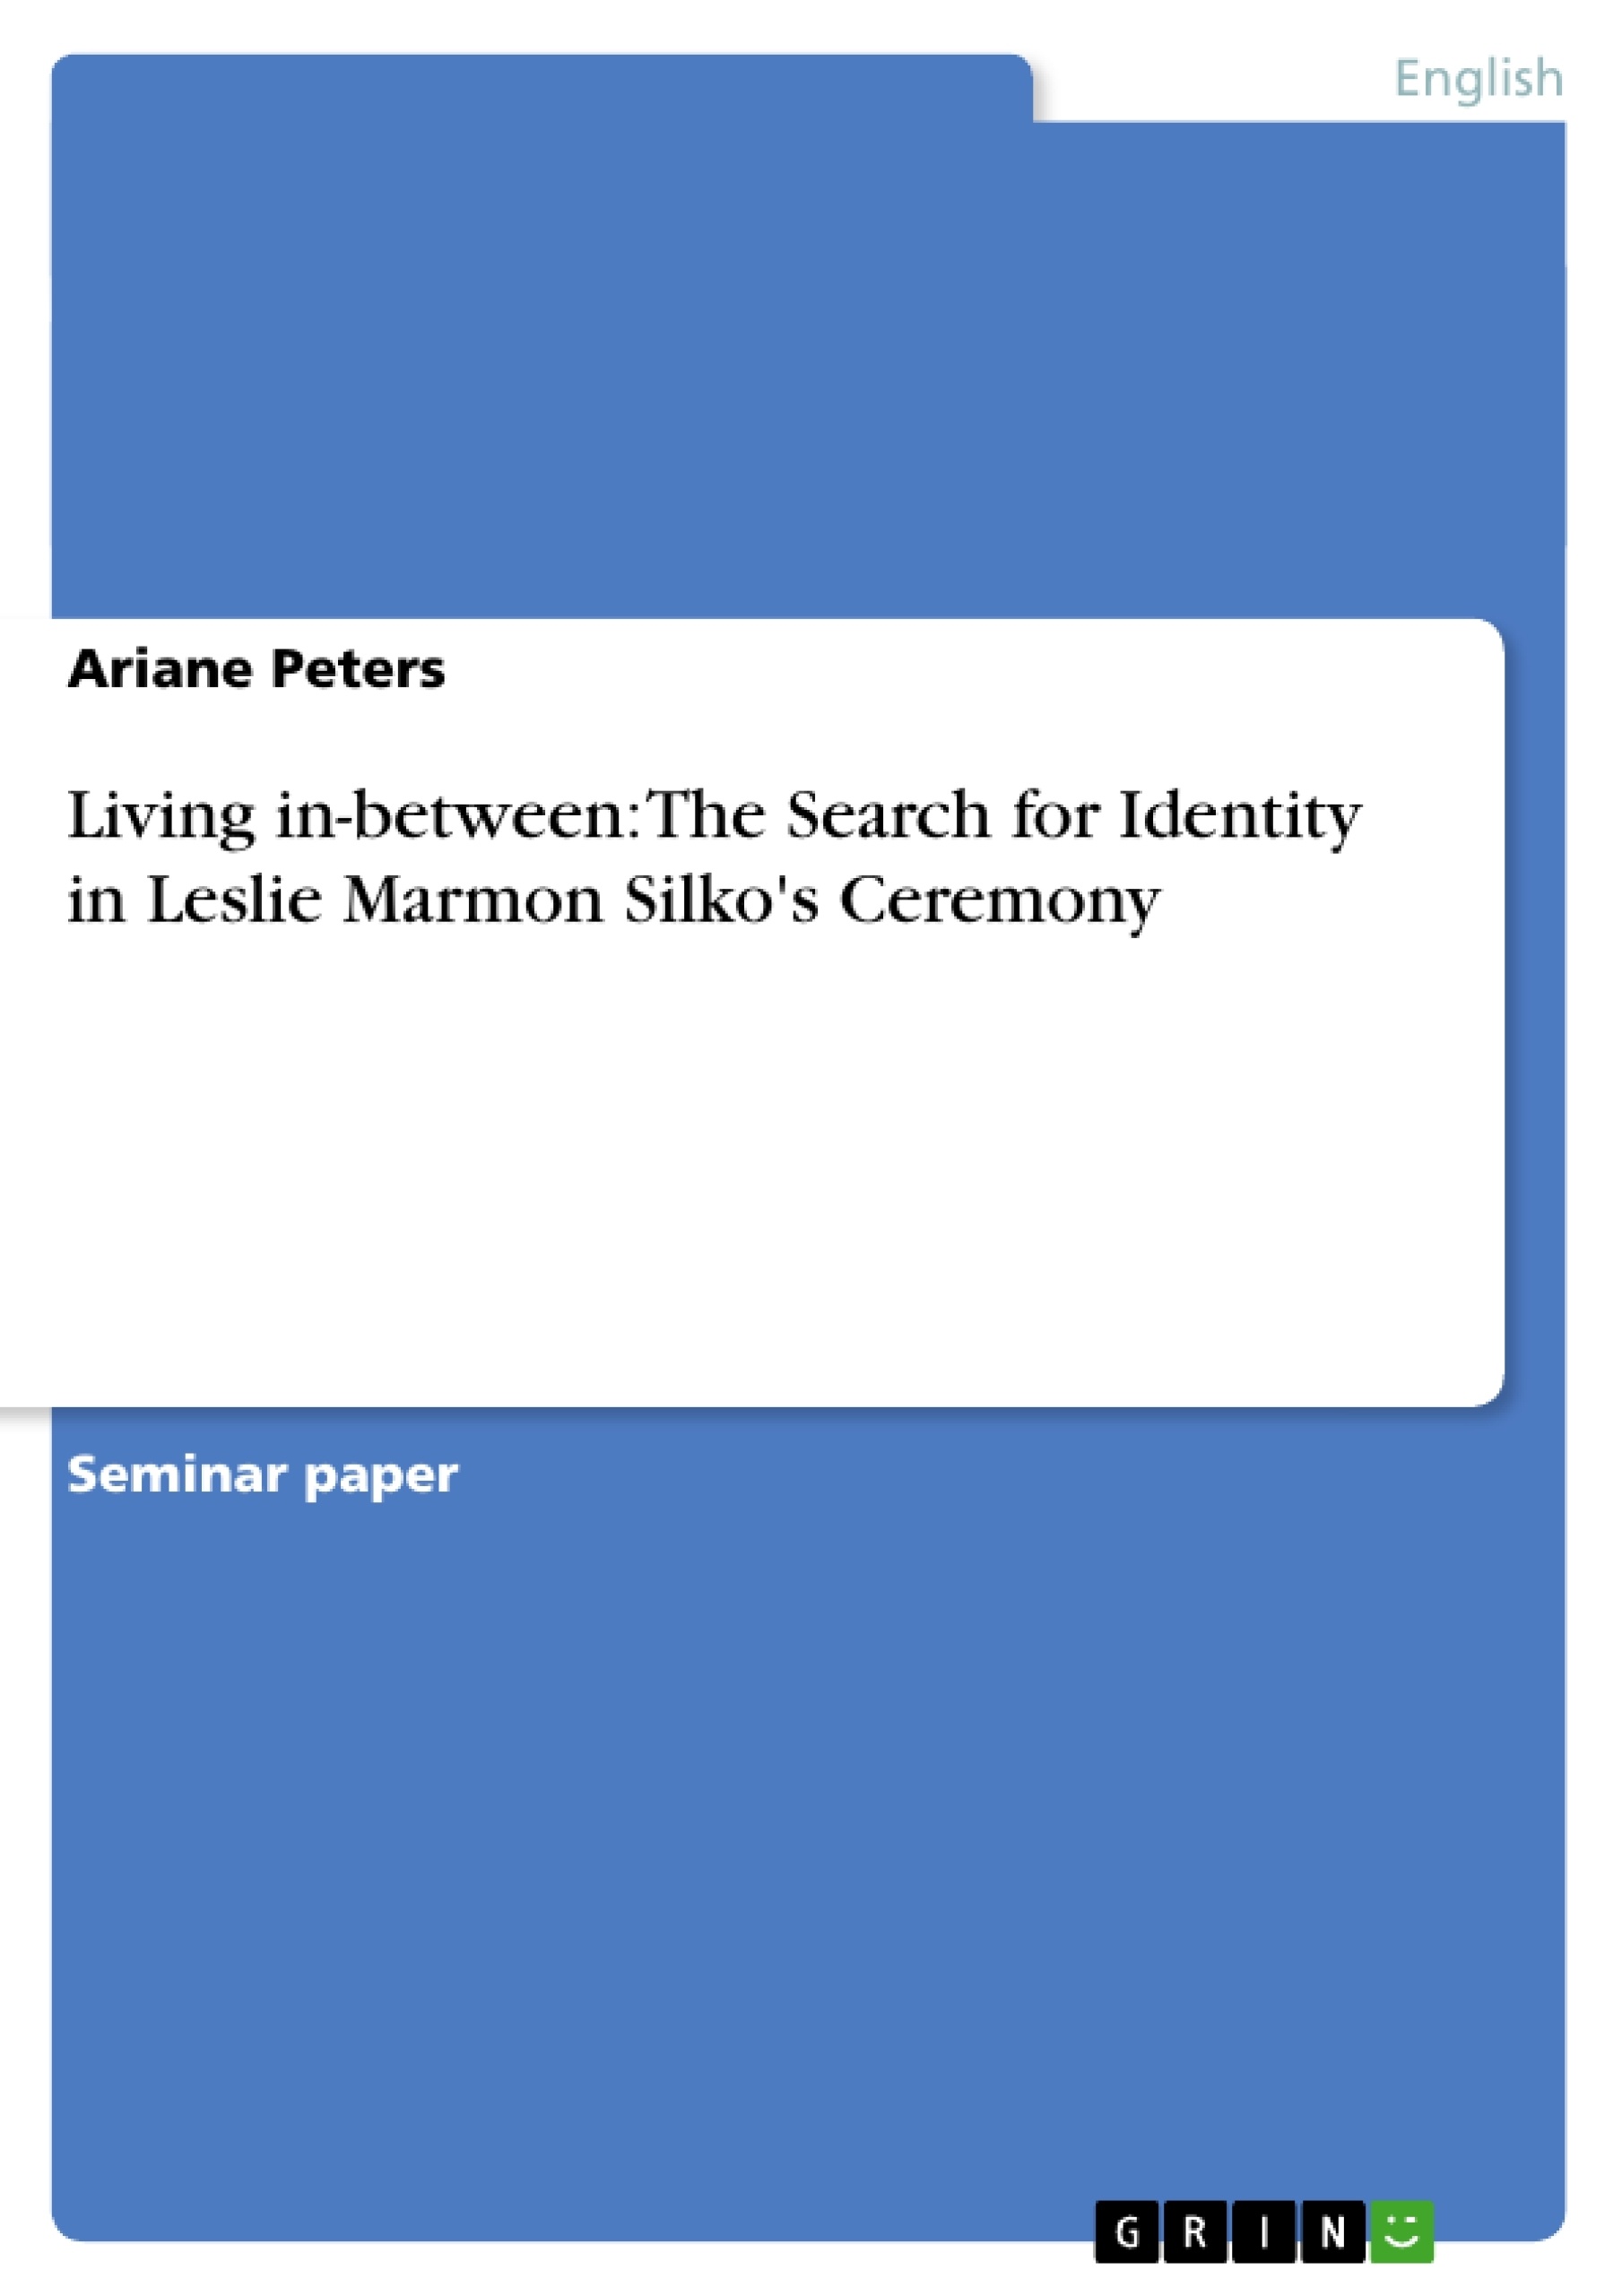 Title: Living in-between: The Search for Identity in Leslie Marmon Silko's Ceremony